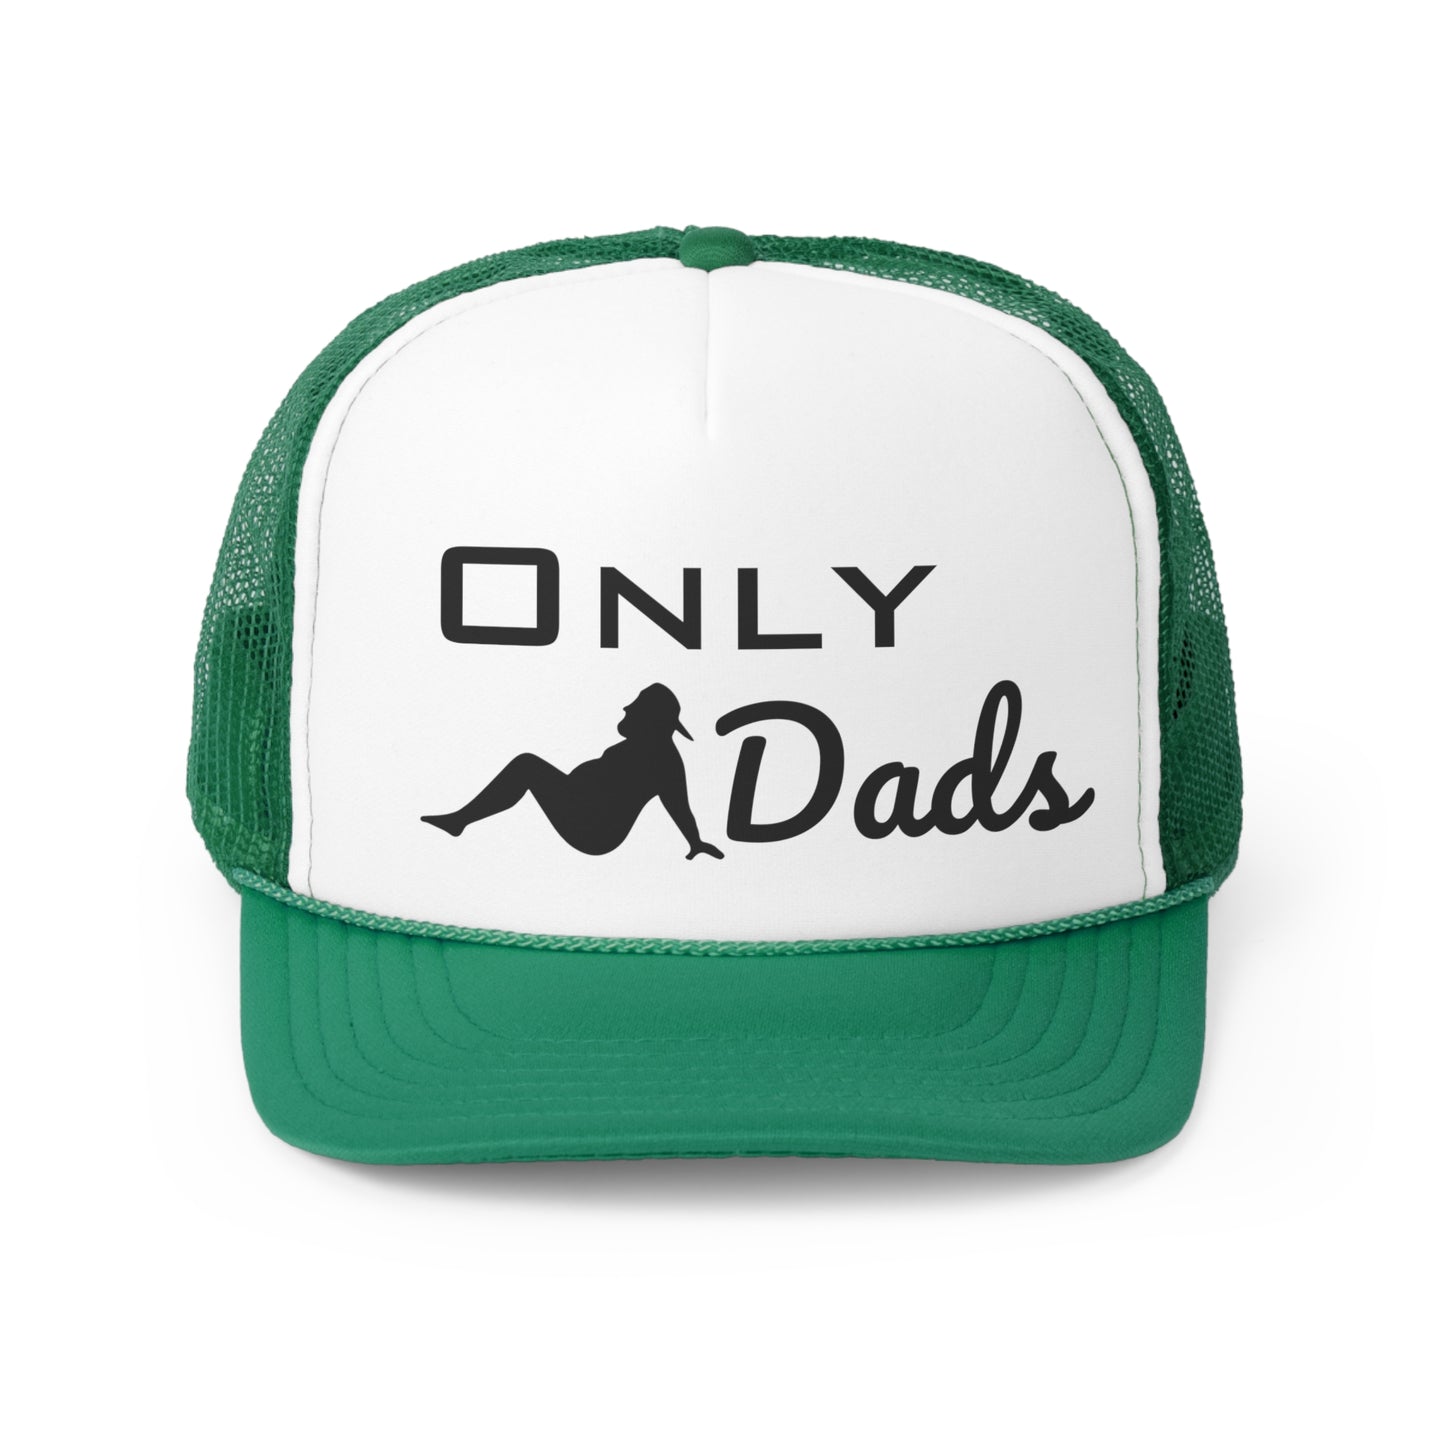 Adjustable "Only Dads" trucker hat celebrating fatherhood in style.